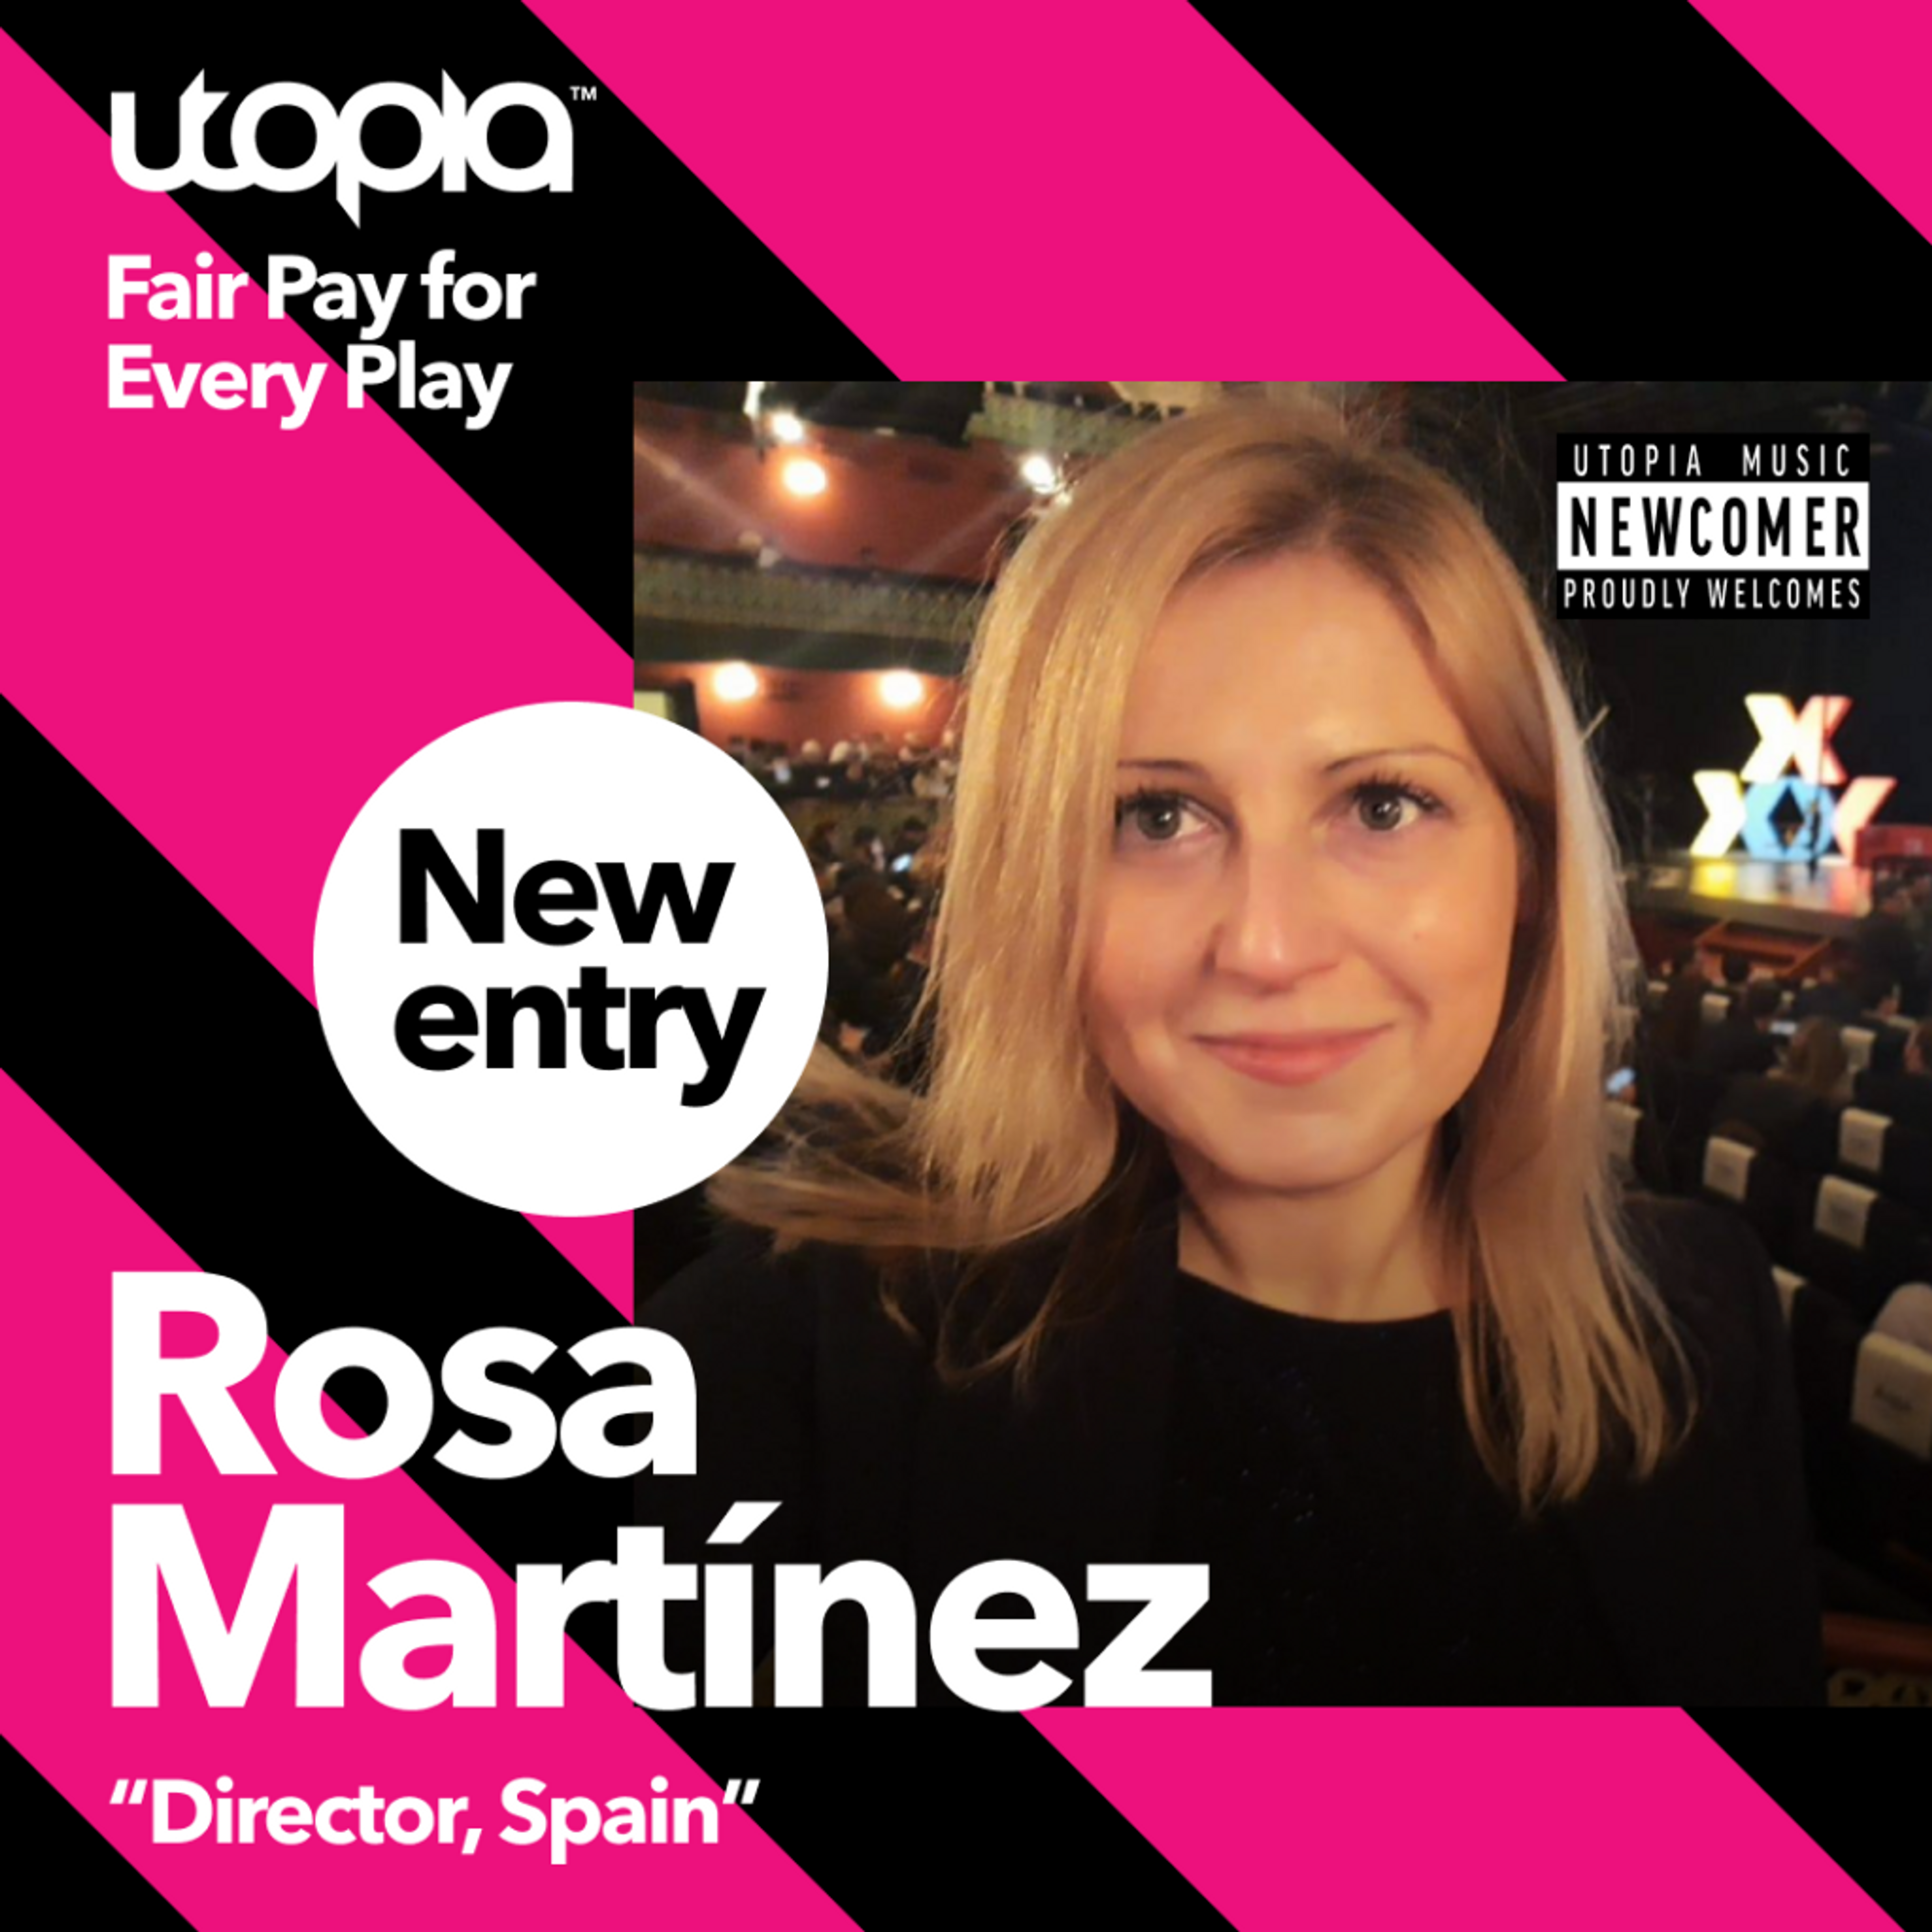 Card image for Rosa Martínez joins Utopia as Director, Spain